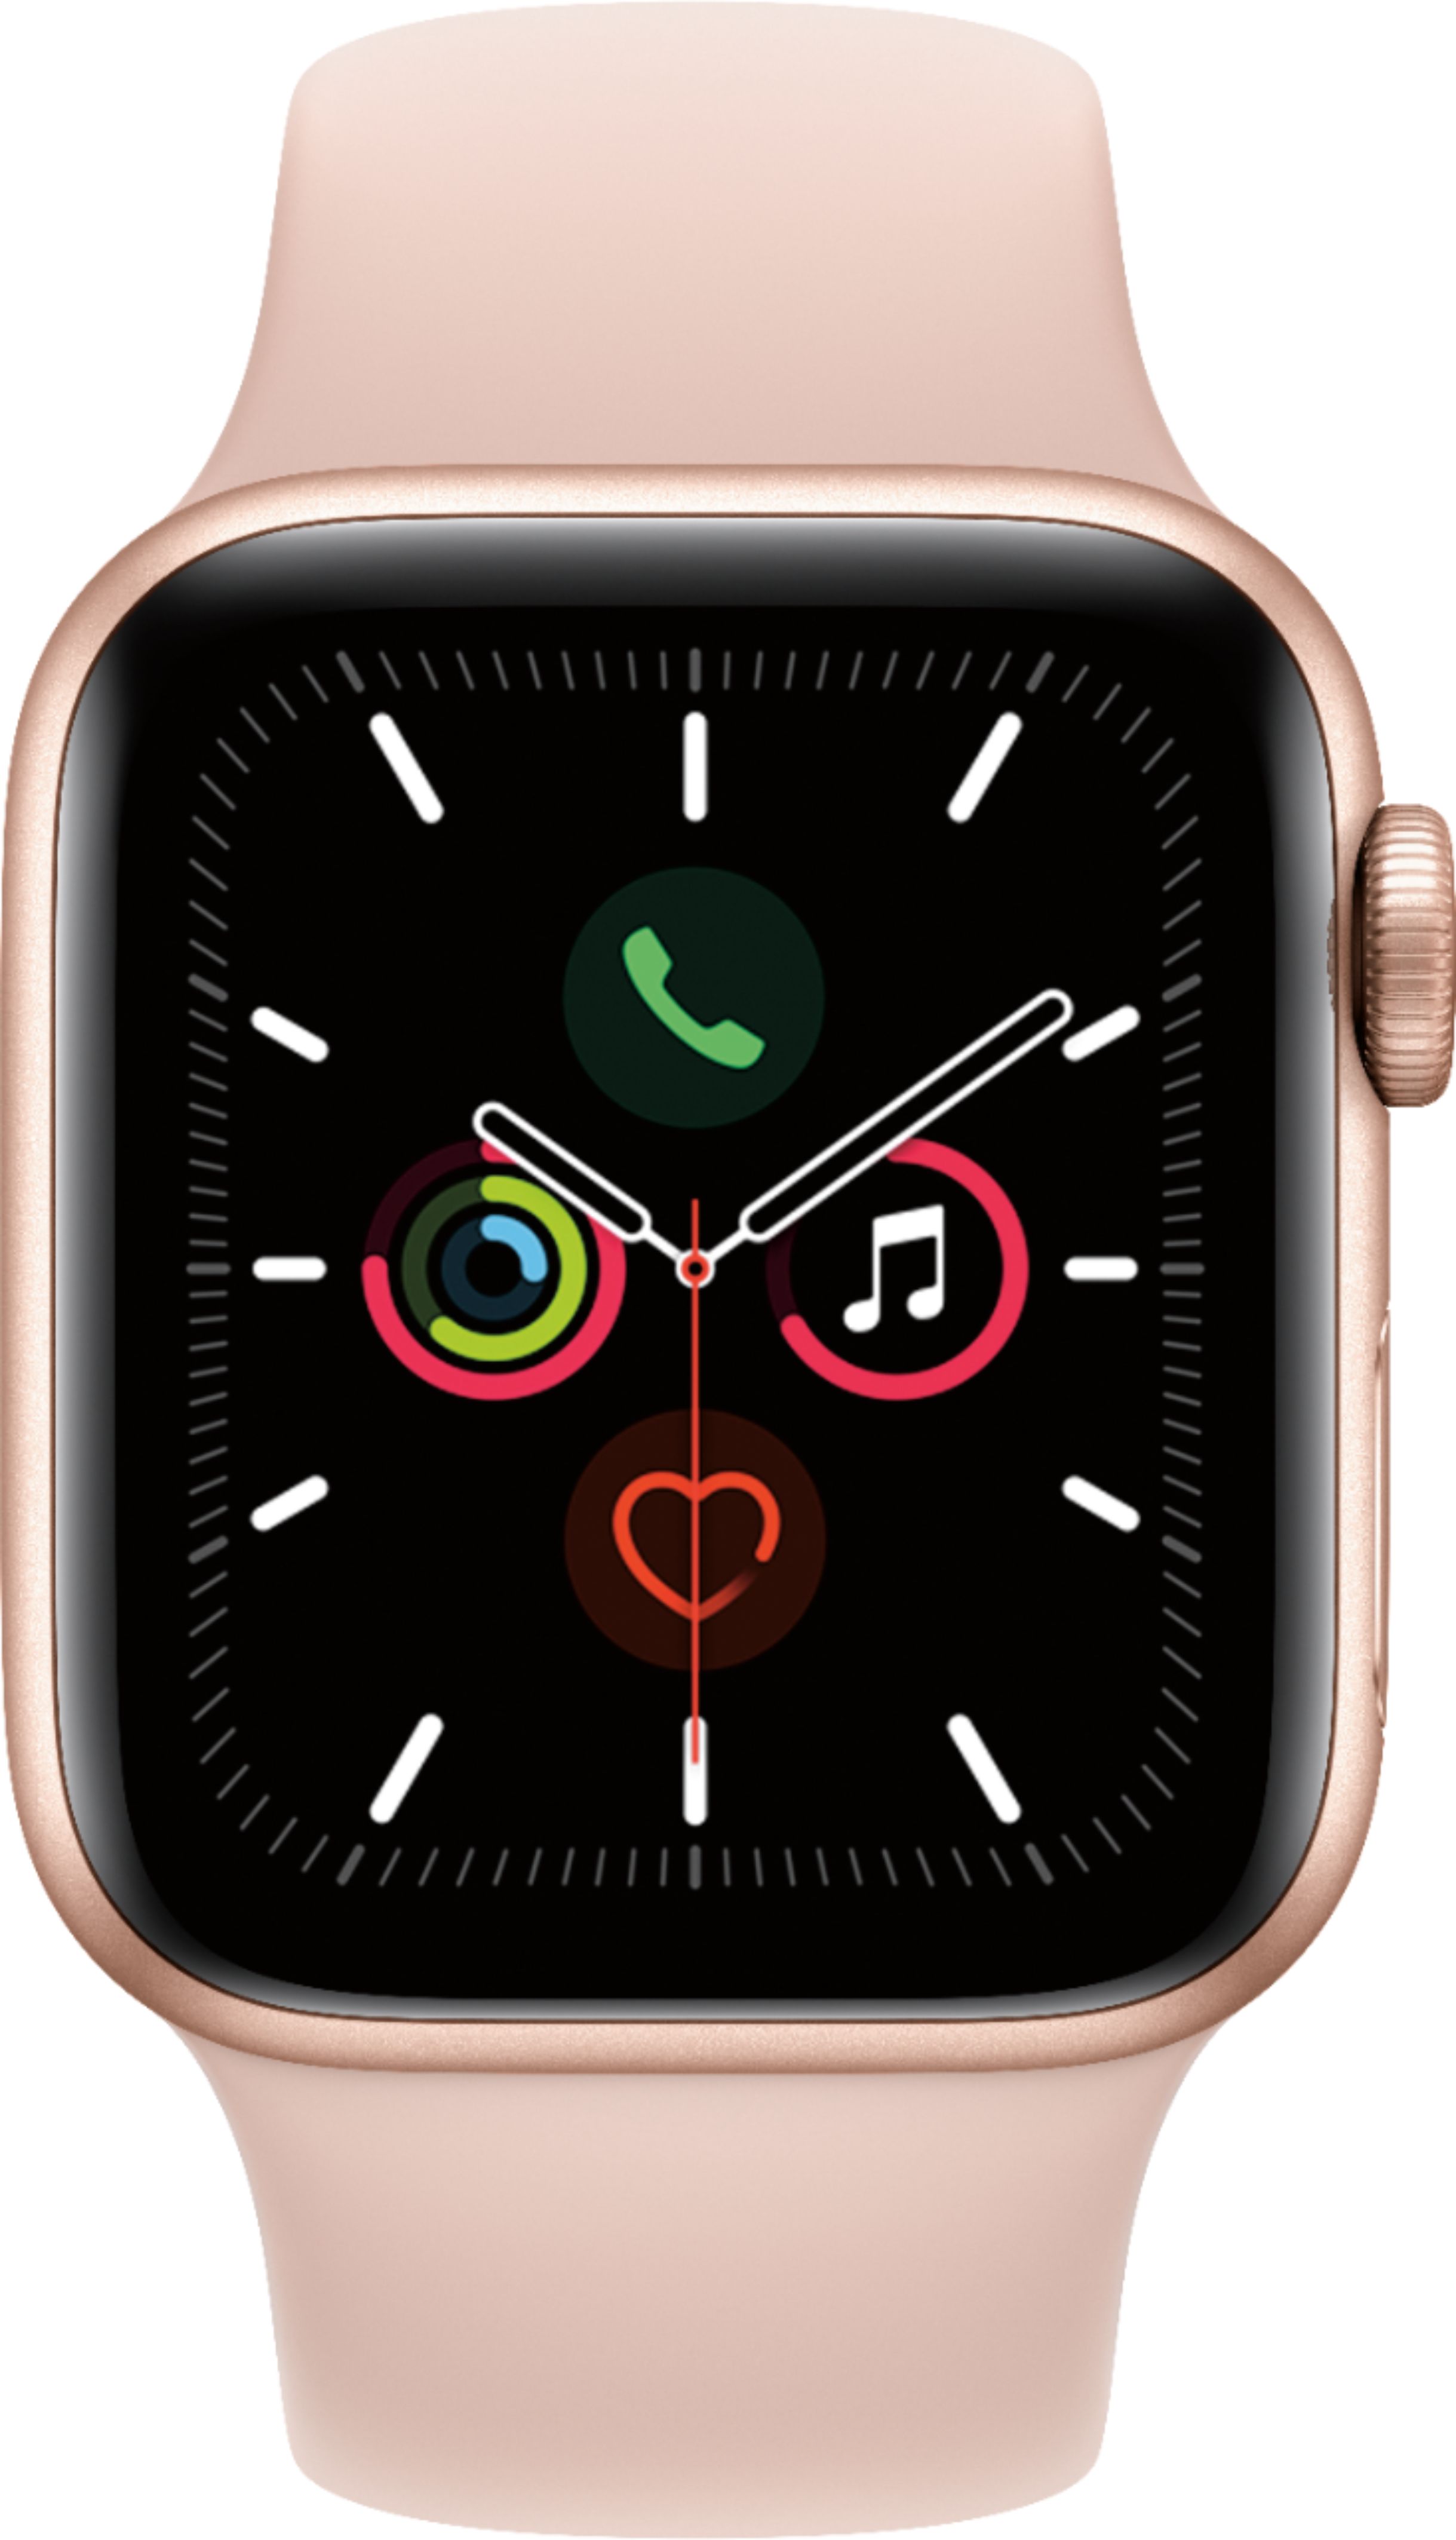 Apple Watch Series 5 Gps 40mm Gold Aluminum Case With Pink Sand